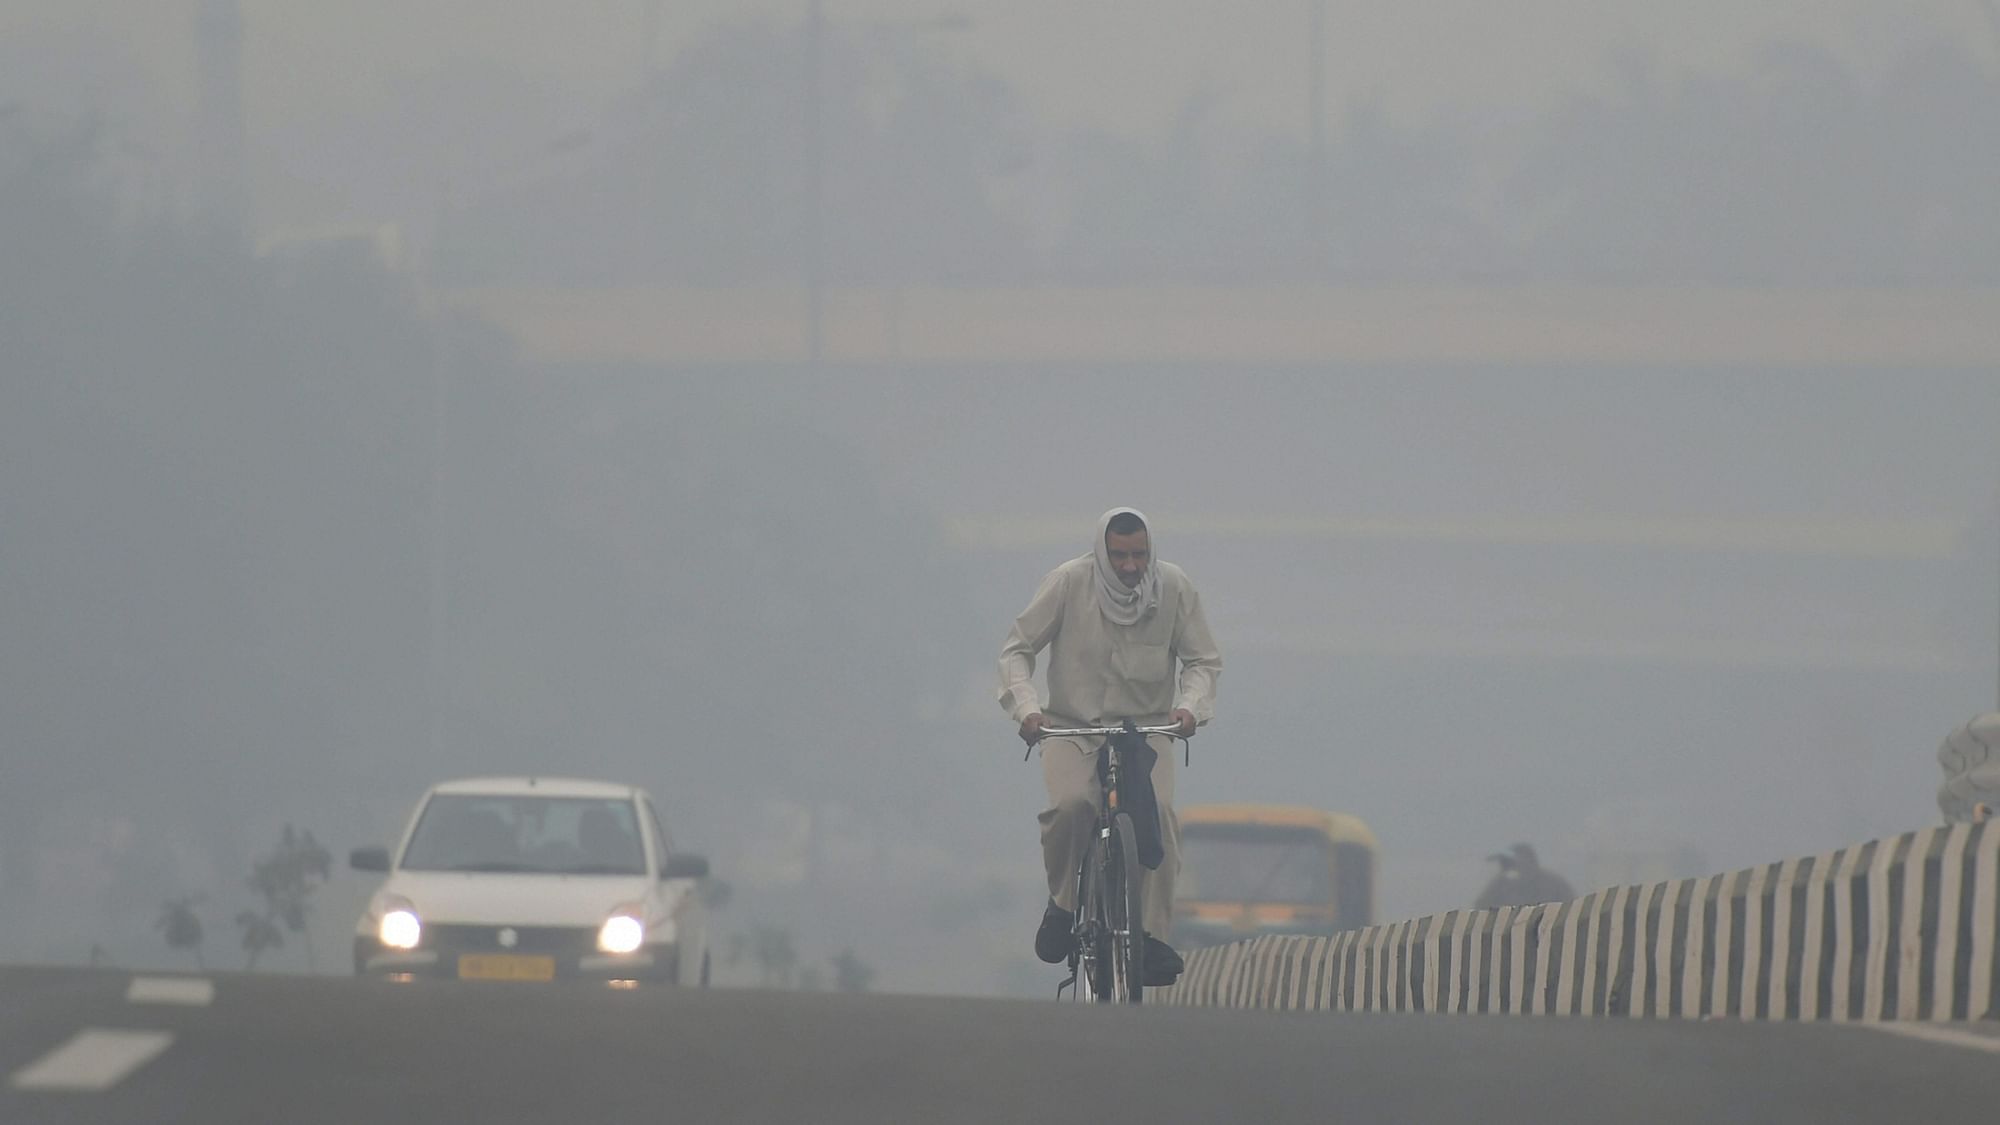 Delhi continues to shiver as the minimum temperature was recorded at 4.2 degrees Celsius  on 27 December.